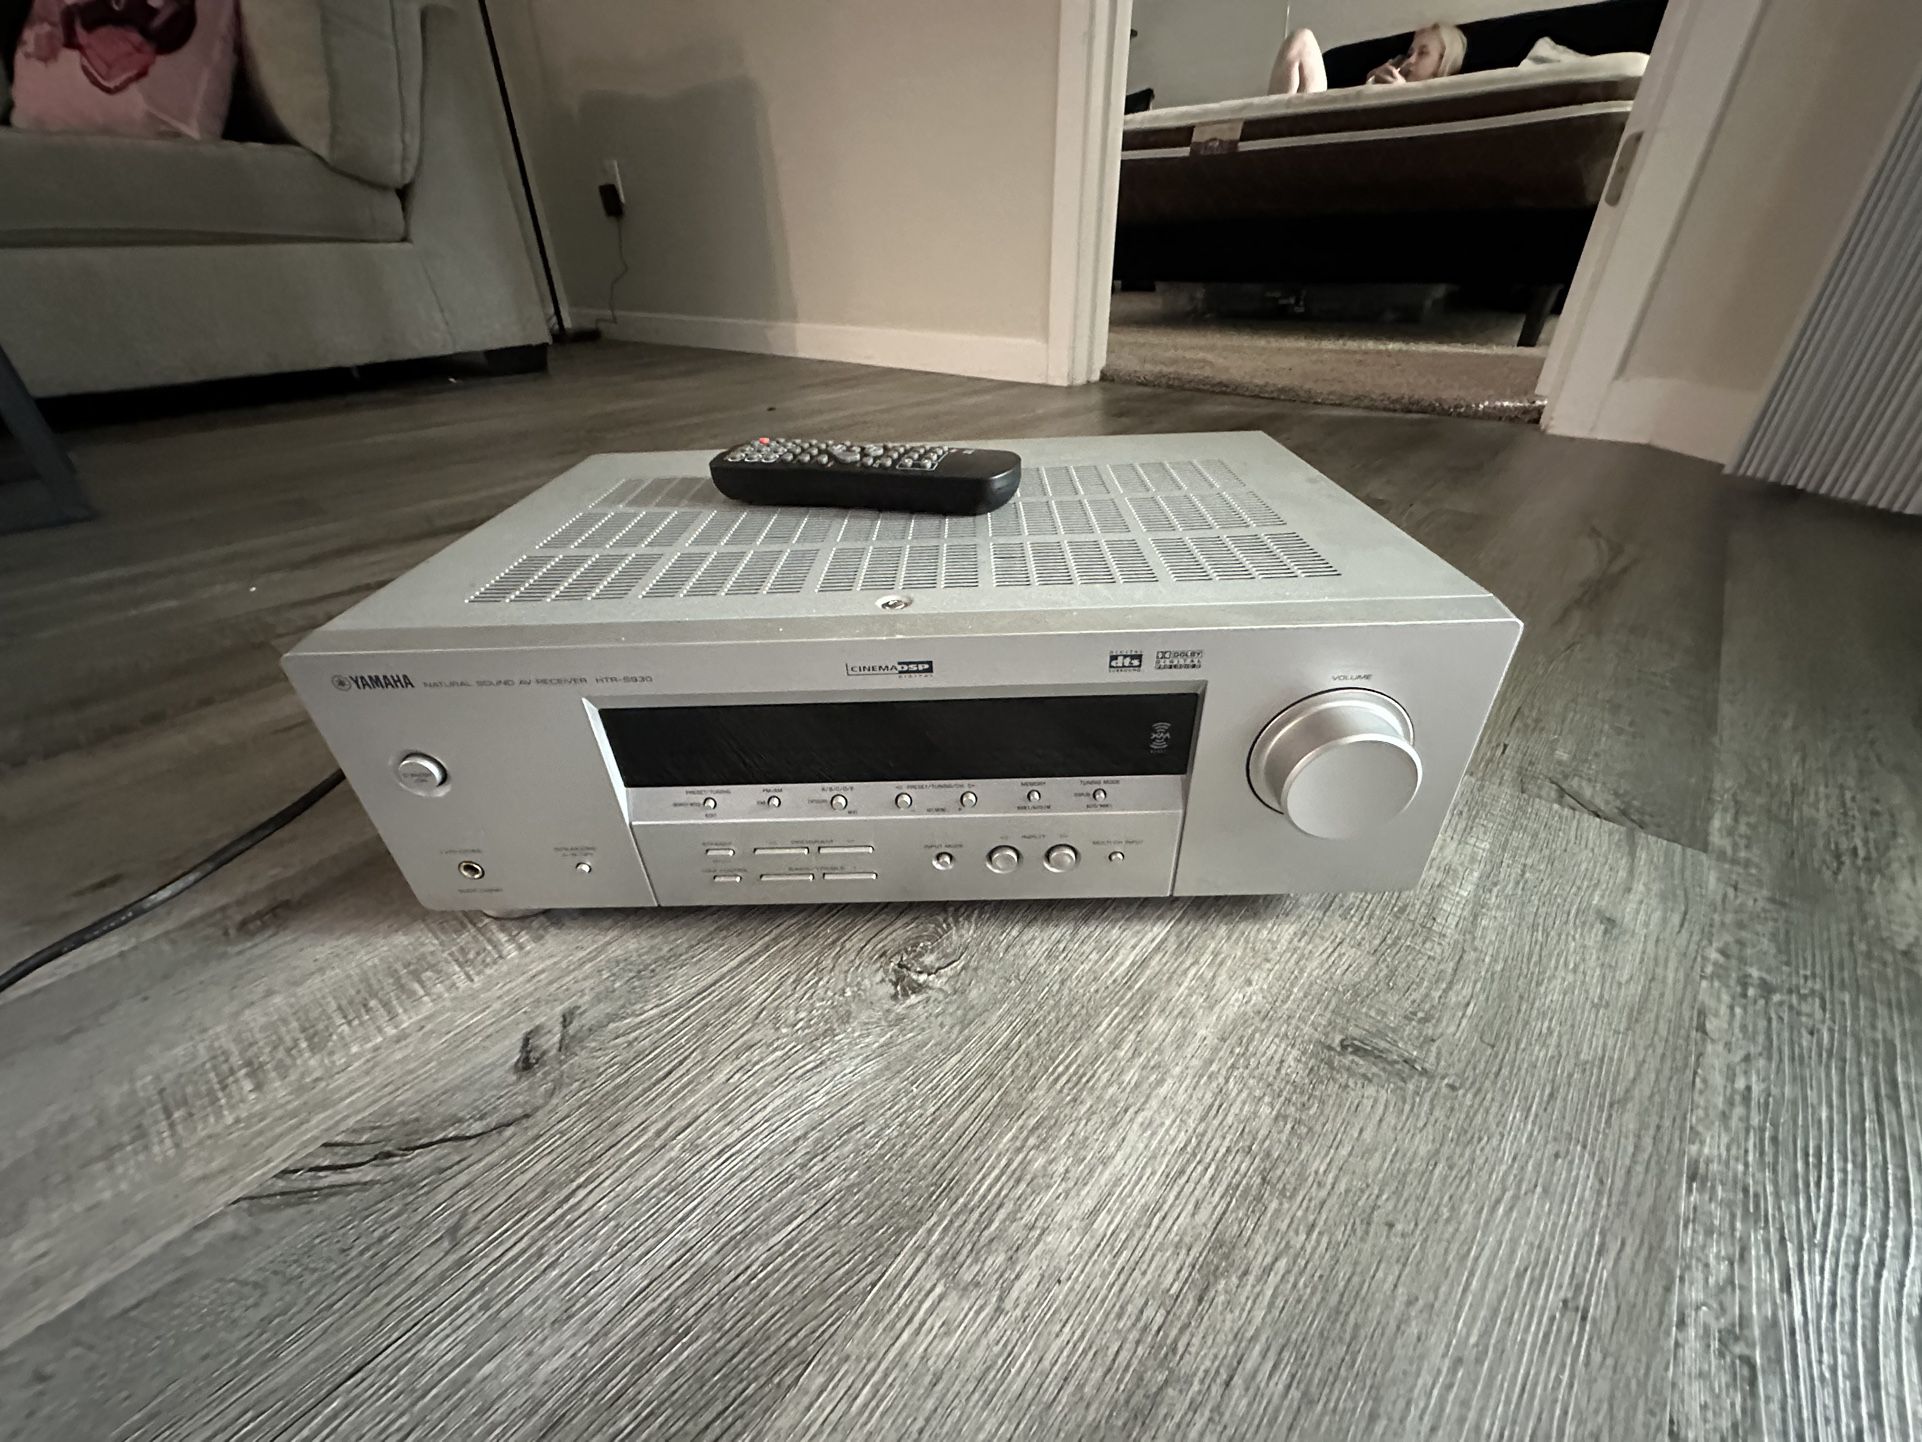 Yamaha Htr-5930 5.1 Surround Little Outdated But Still A Very Enjoyable Sound